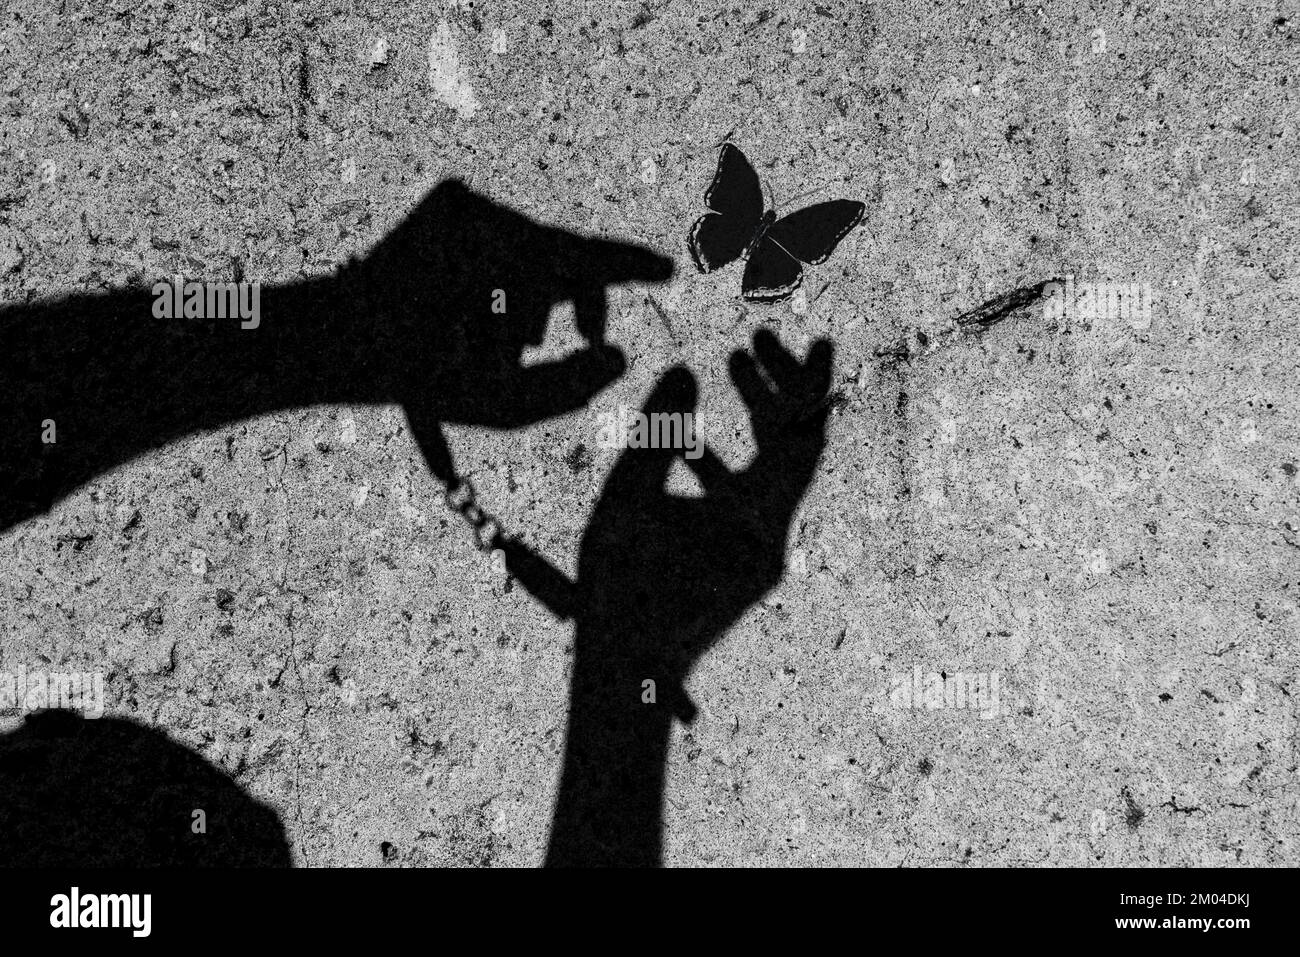 The shadow of a criminal in handcuffs against the background of a concrete prison wall. Handcuffed hands cling to freedom and try to catch a butterfly Stock Photo